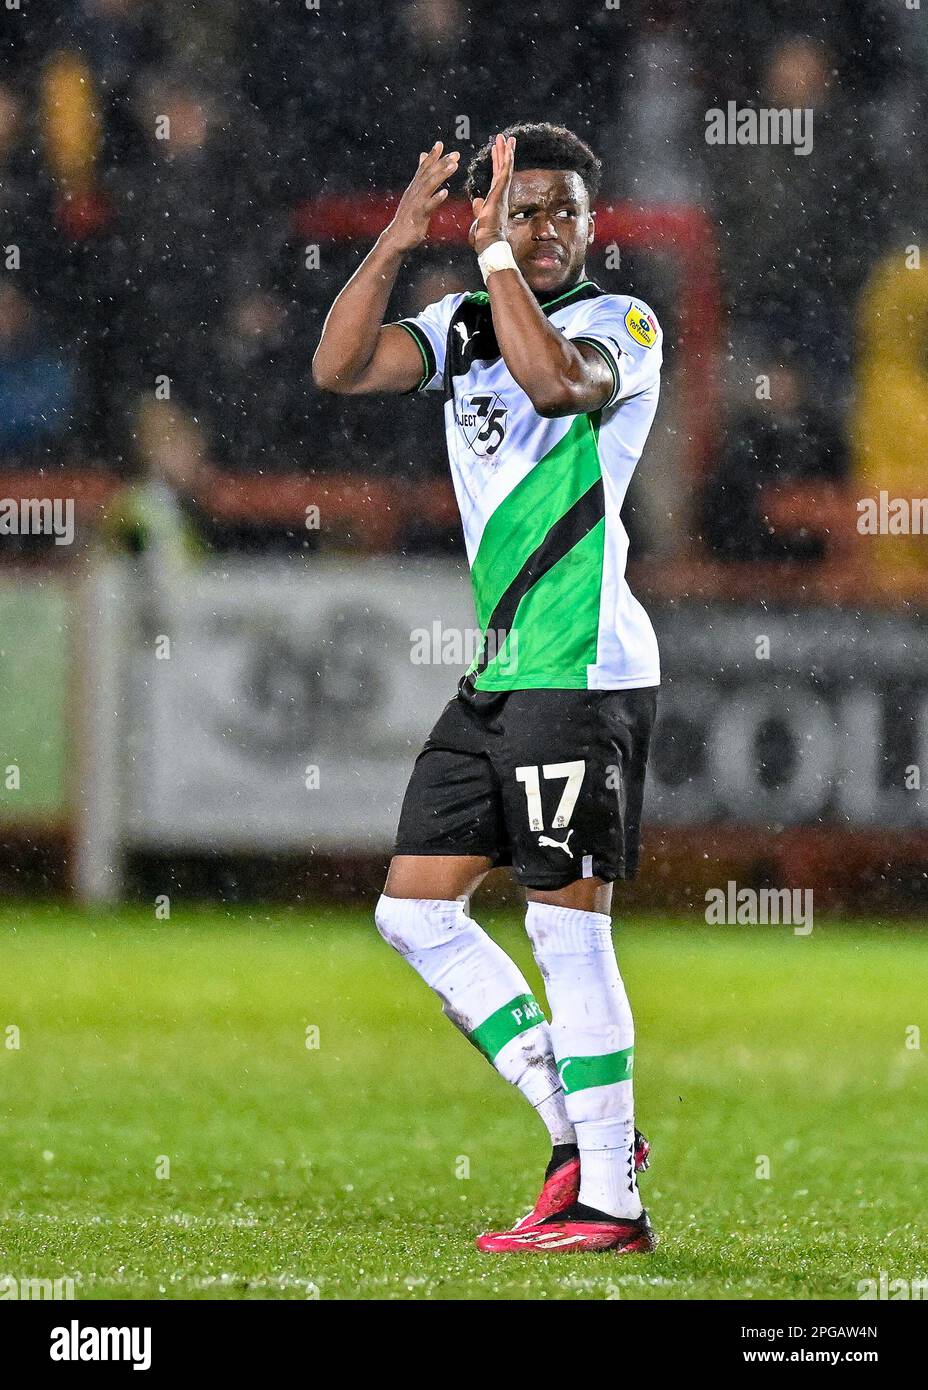 Bali Mumba #17 of Plymouth Argyle   is substituted off and applaud fans during the Sky Bet League 1 match Accrington Stanley vs Plymouth Argyle at Wham Stadium, Accrington, United Kingdom, 21st March 2023  (Photo by Stan Kasala/News Images) Stock Photo